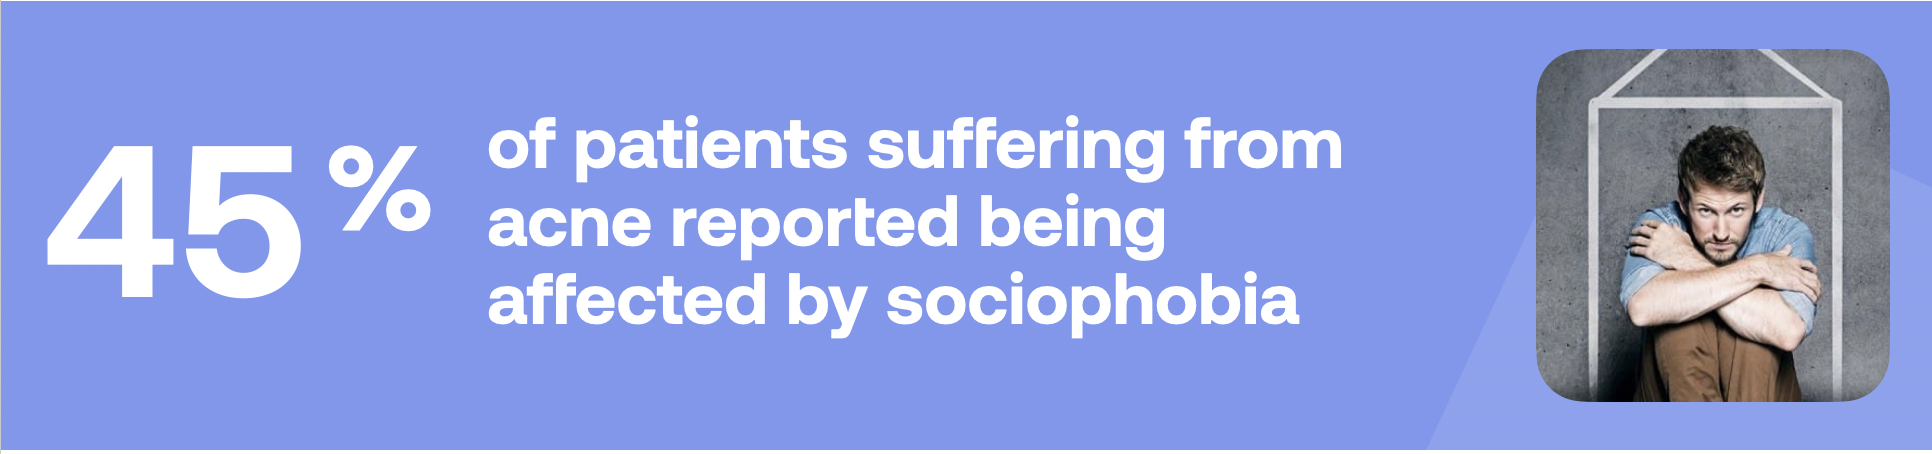 45% of patients suffering from acne reported being affected by sociophobia, stats